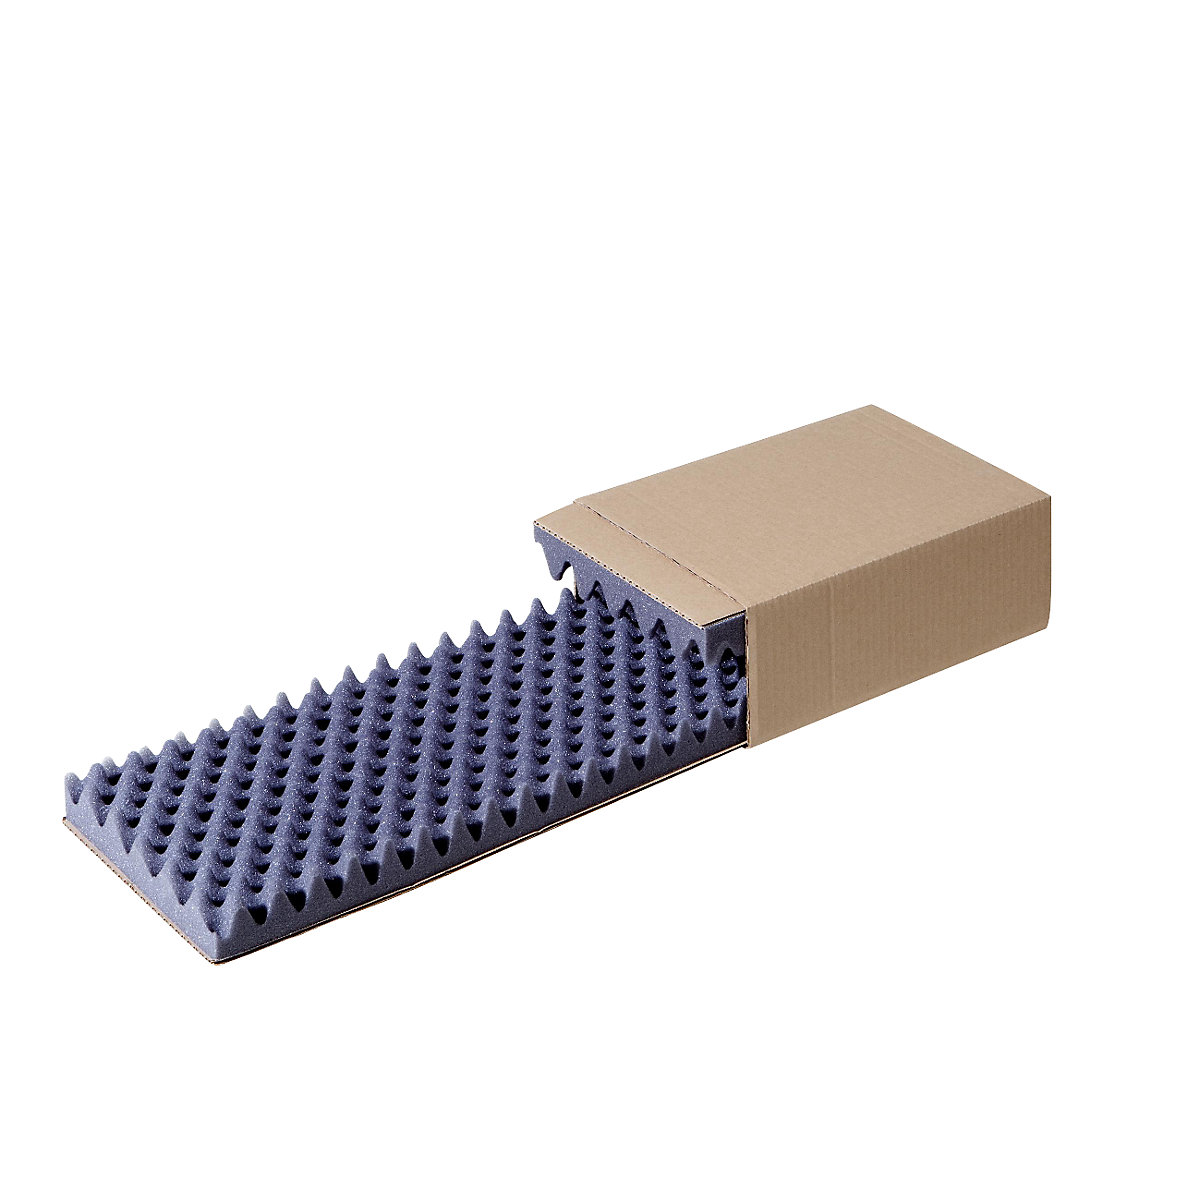 Slide boxes, internal part FEFCO 0907, external part FEFCO 0503, padded, internal dimensions 300 x 200 x 100 mm, pack of 50-6